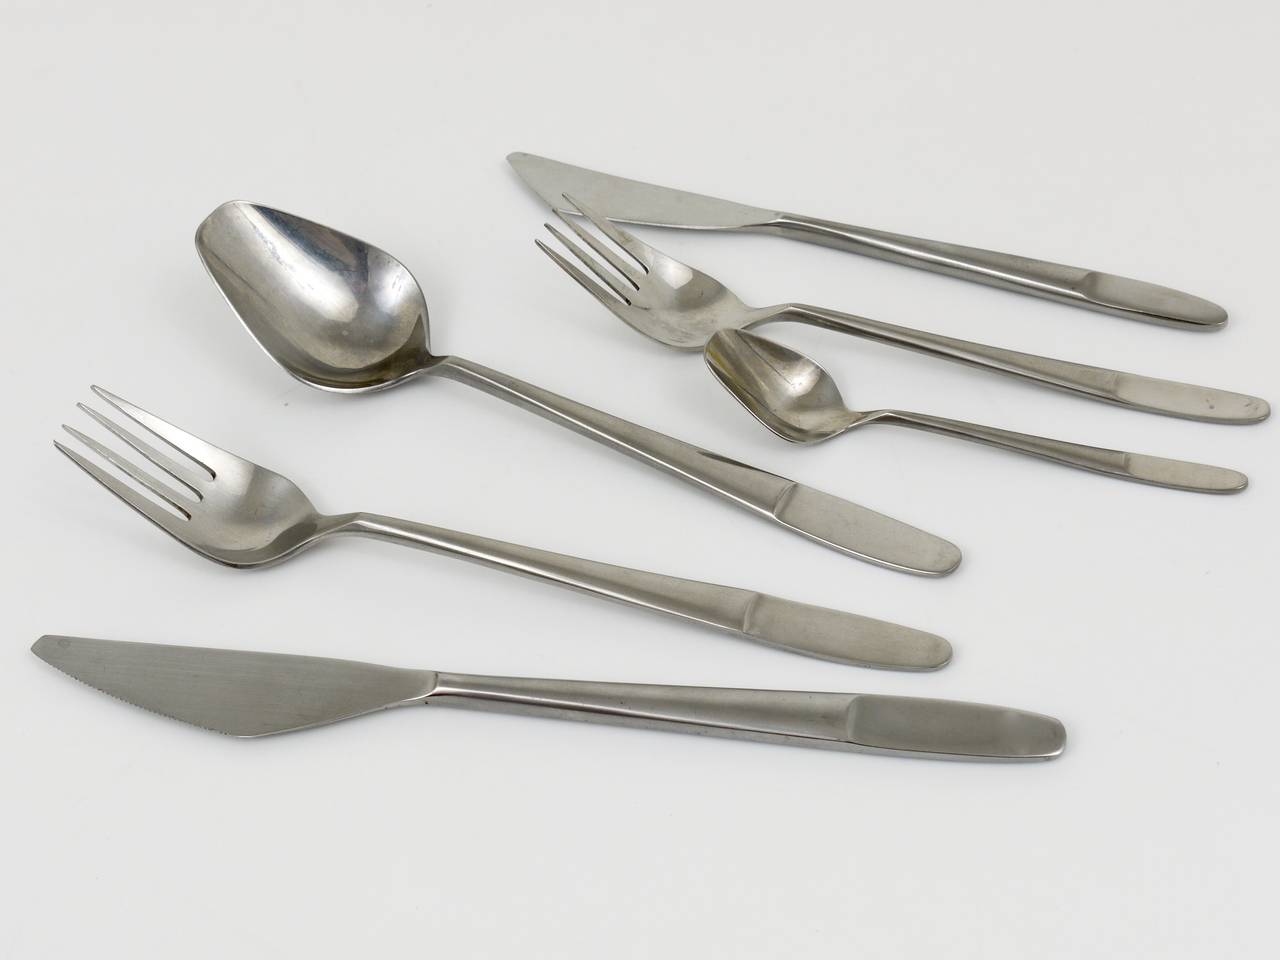 Beautiful modernist flatware from Austria, model 2070, designed by Helmut Alder, executed by Amboss Austria in the 1960s. High-quality flatware, made of stainless steel.
For six persons, consists of six big spoons, forks and knives and six smaller